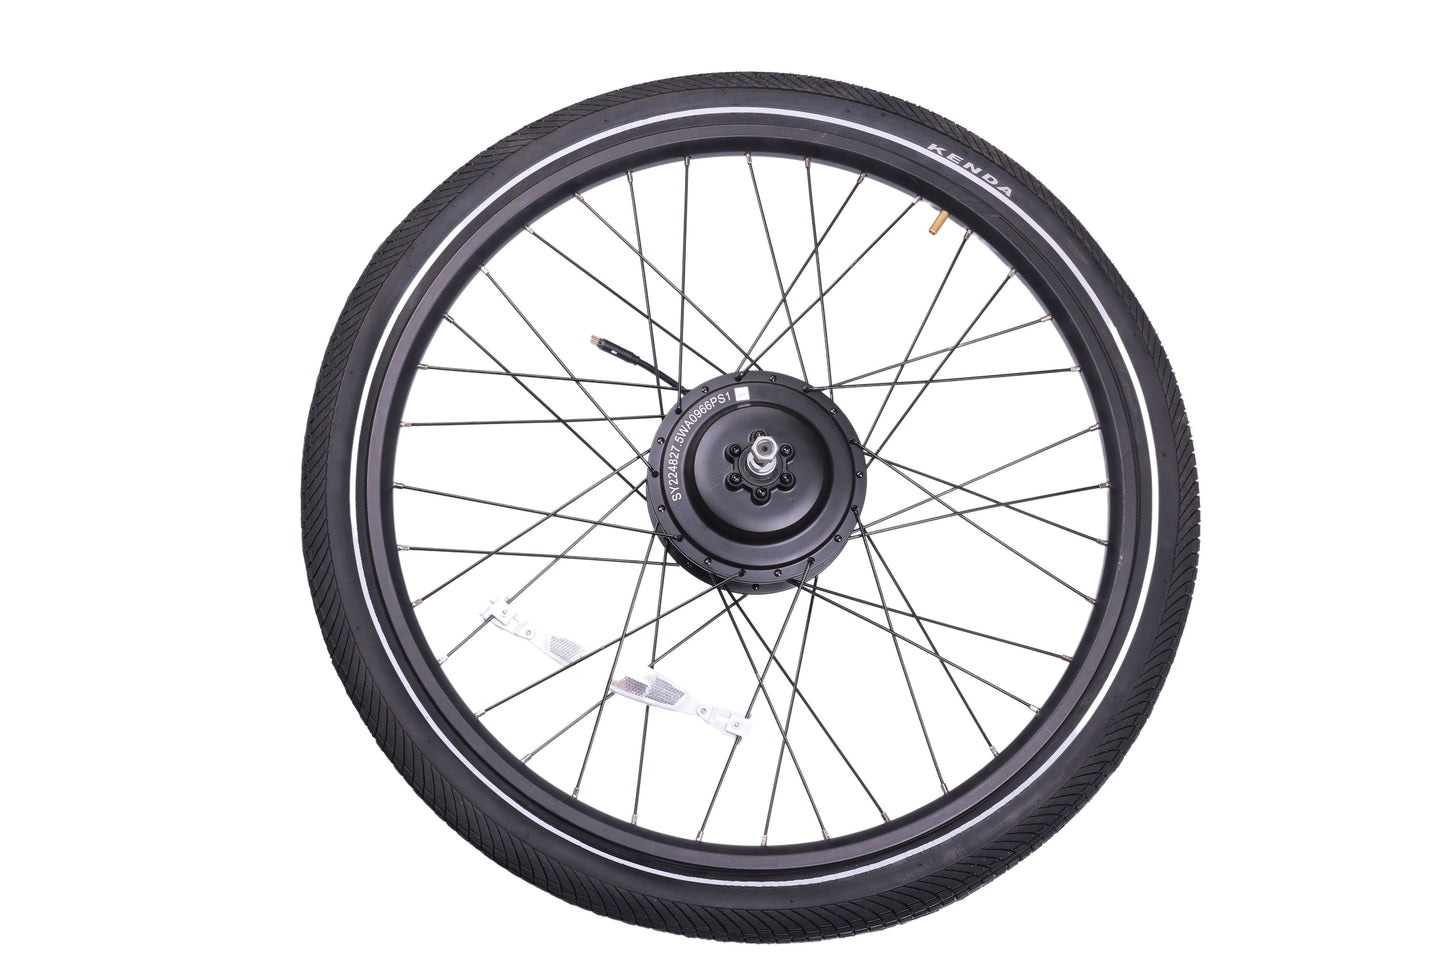 Wheel Assembly Replacement for Denago City 1 eBikes